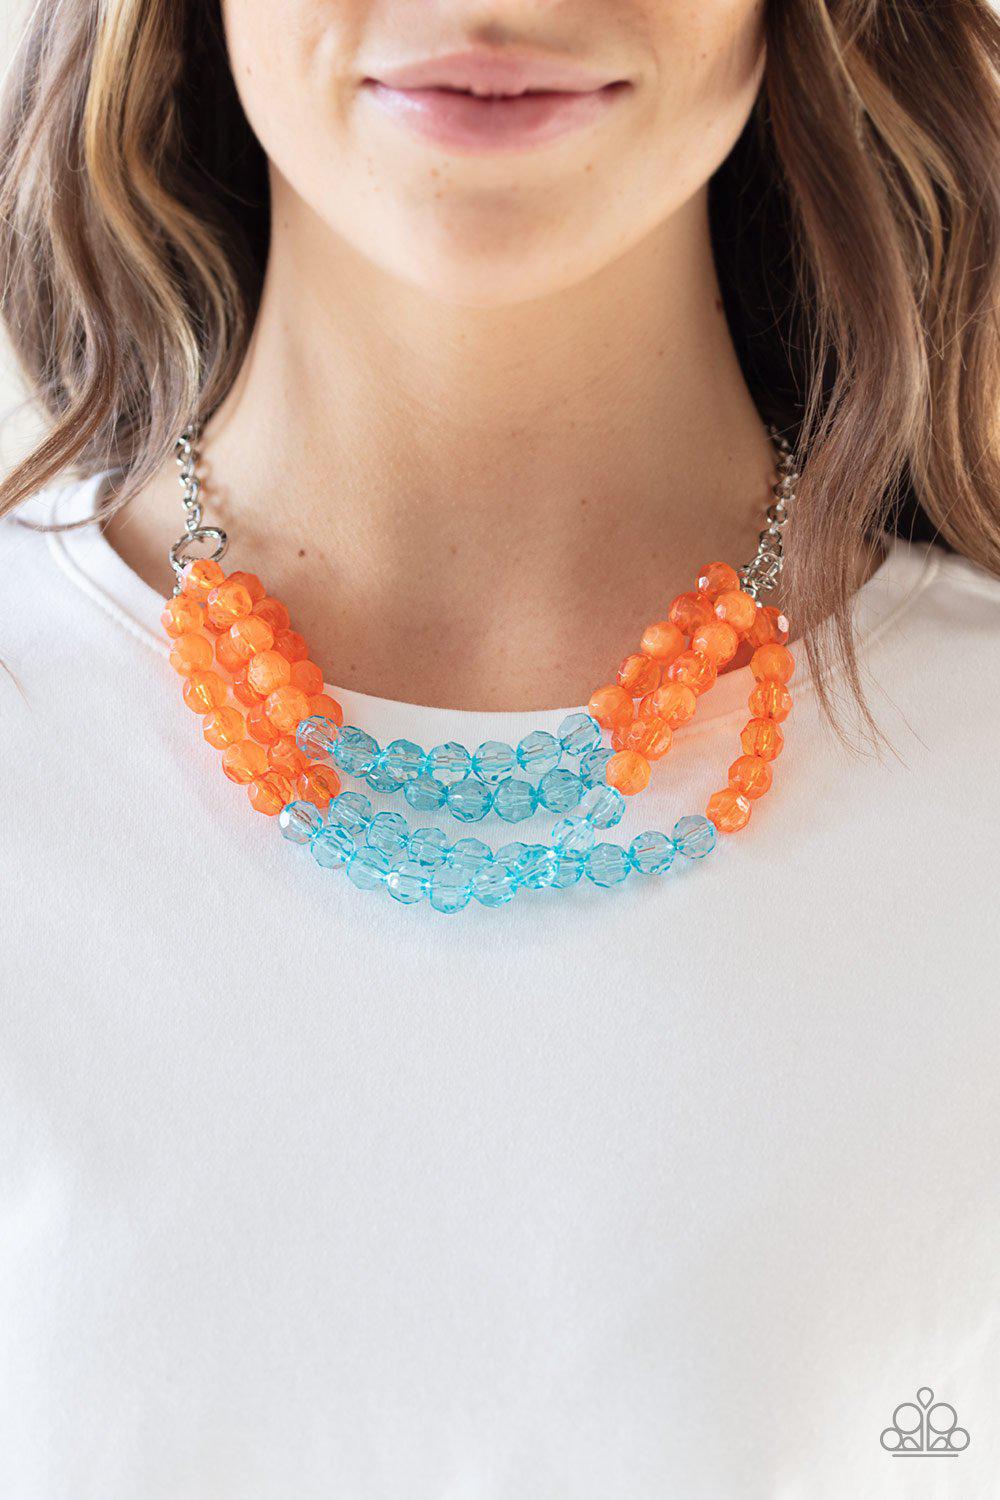 Summer Ice Orange and Blue Necklace - Paparazzi Accessories - model -CarasShop.com - $5 Jewelry by Cara Jewels